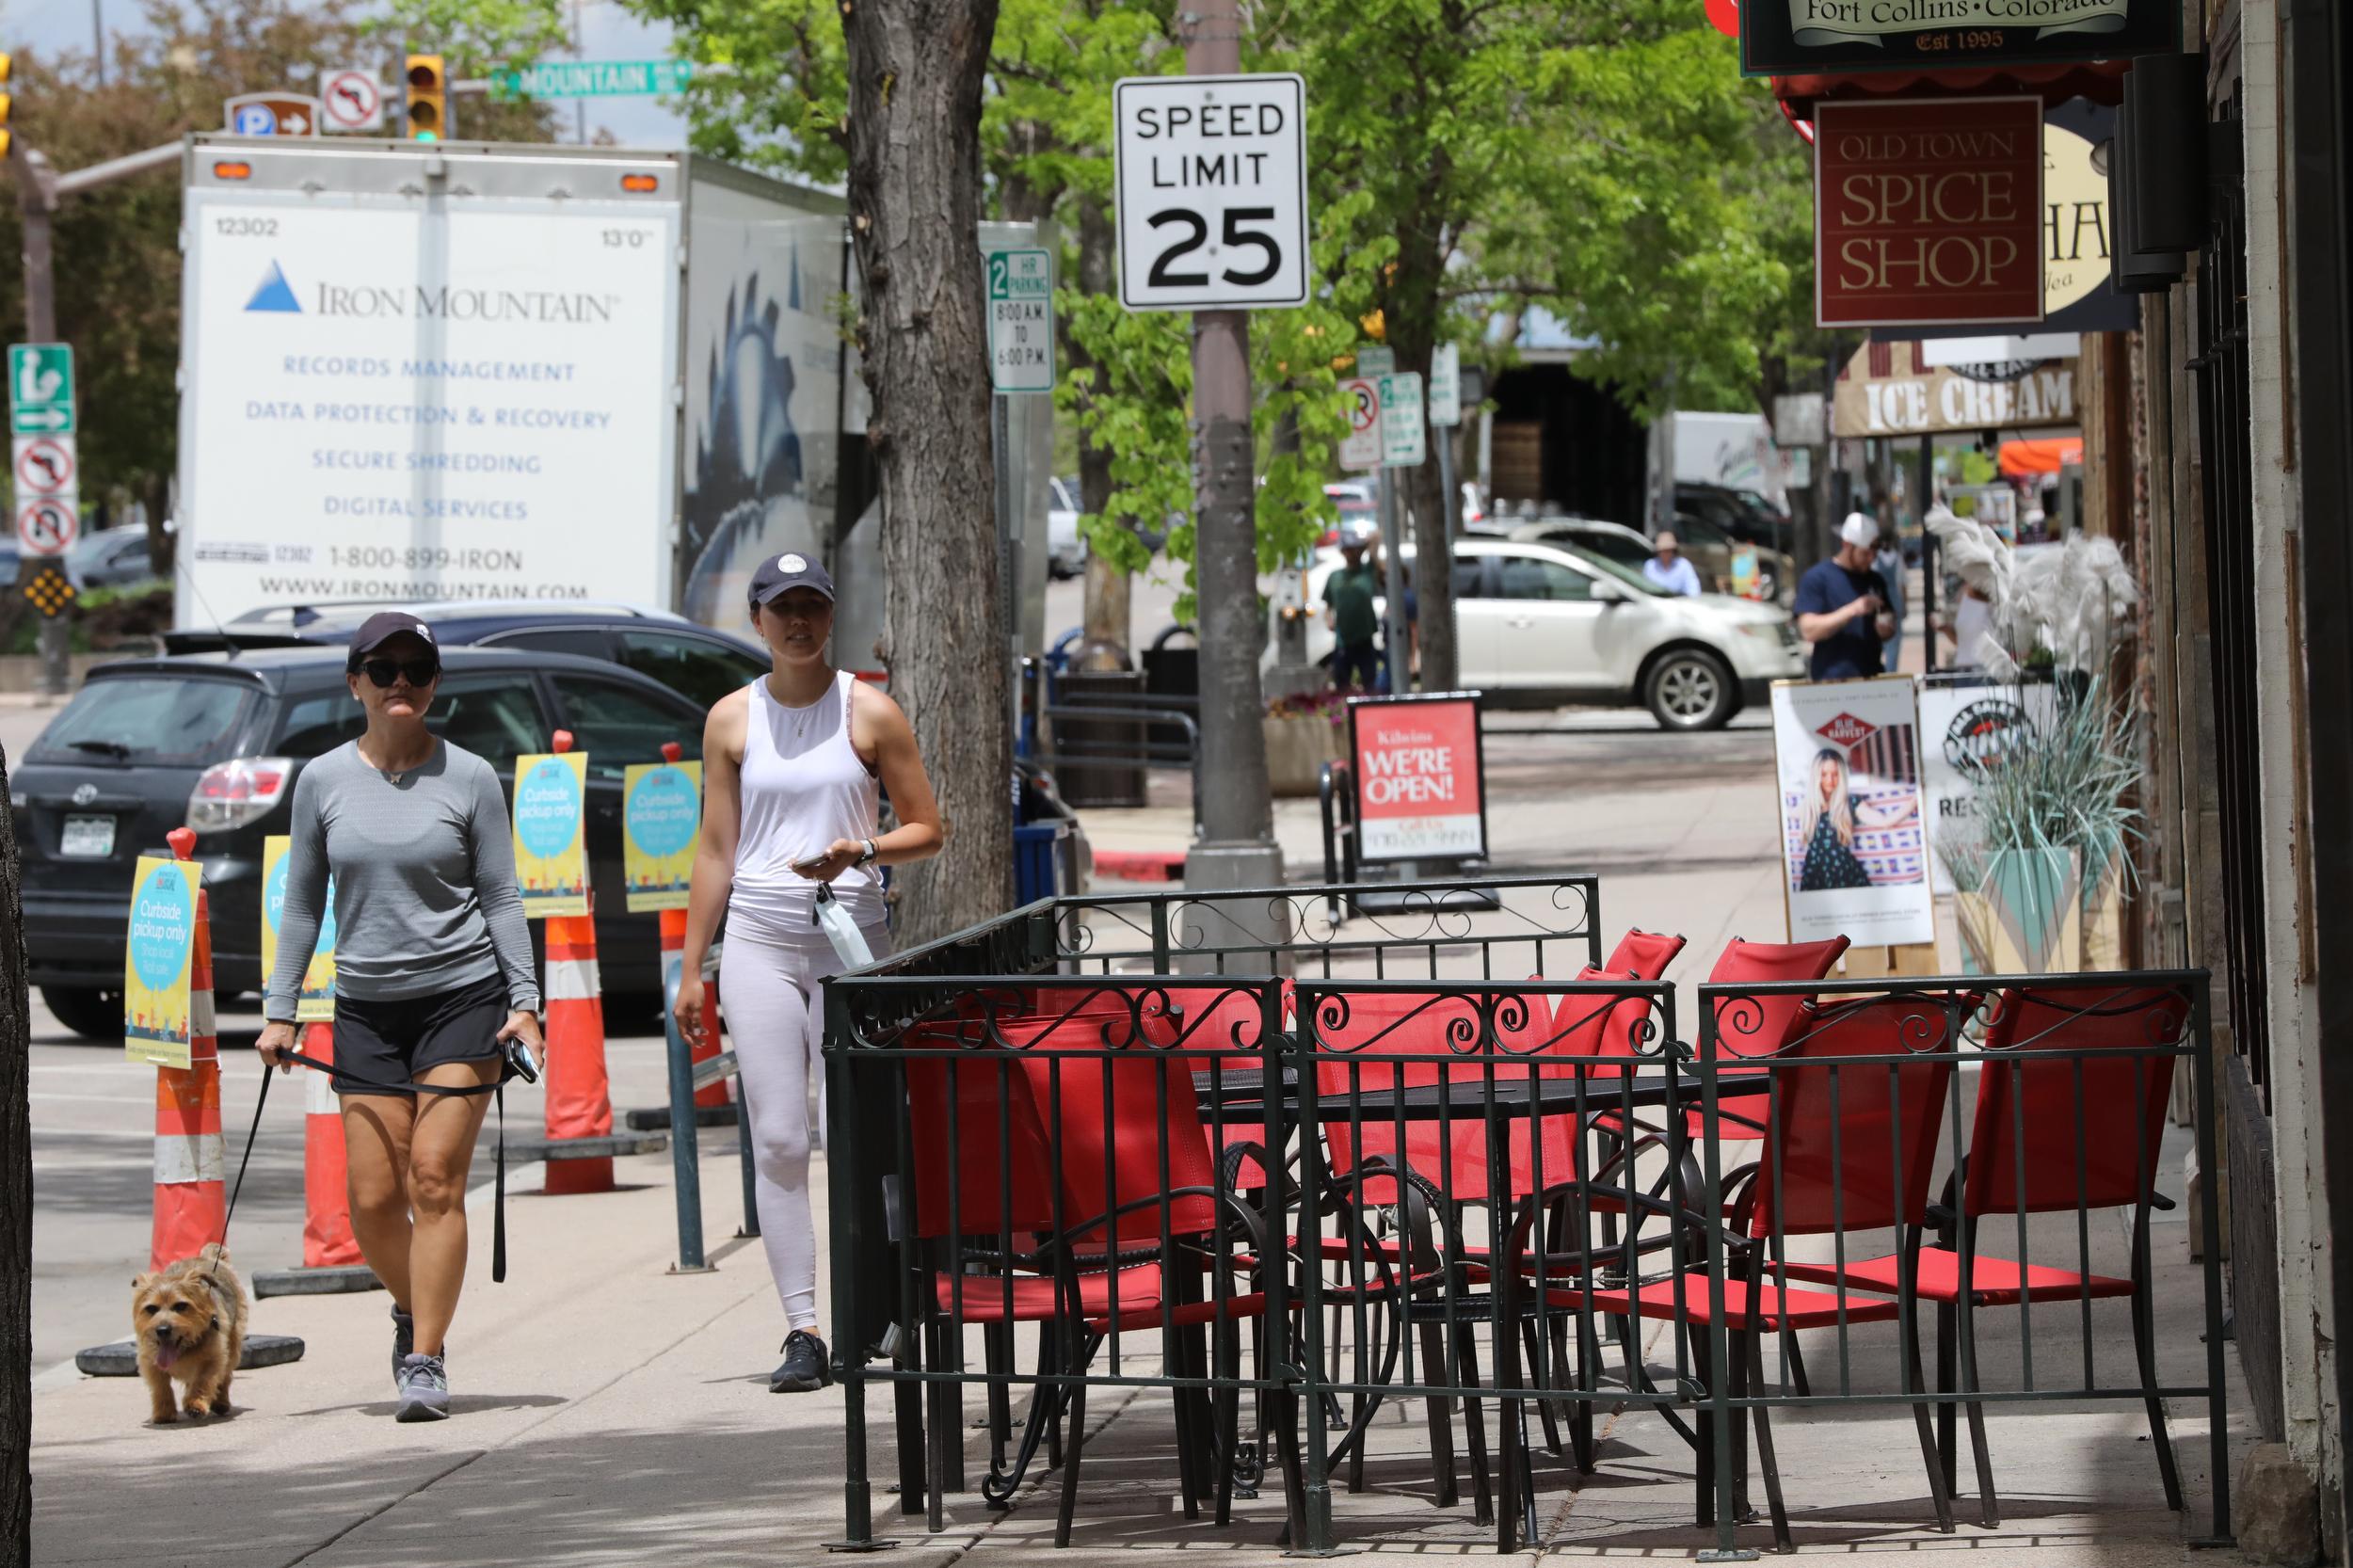 Some Fort Collins Restaurants Begin Reopening For Seated Customers, Masks and Social Distancing In Place